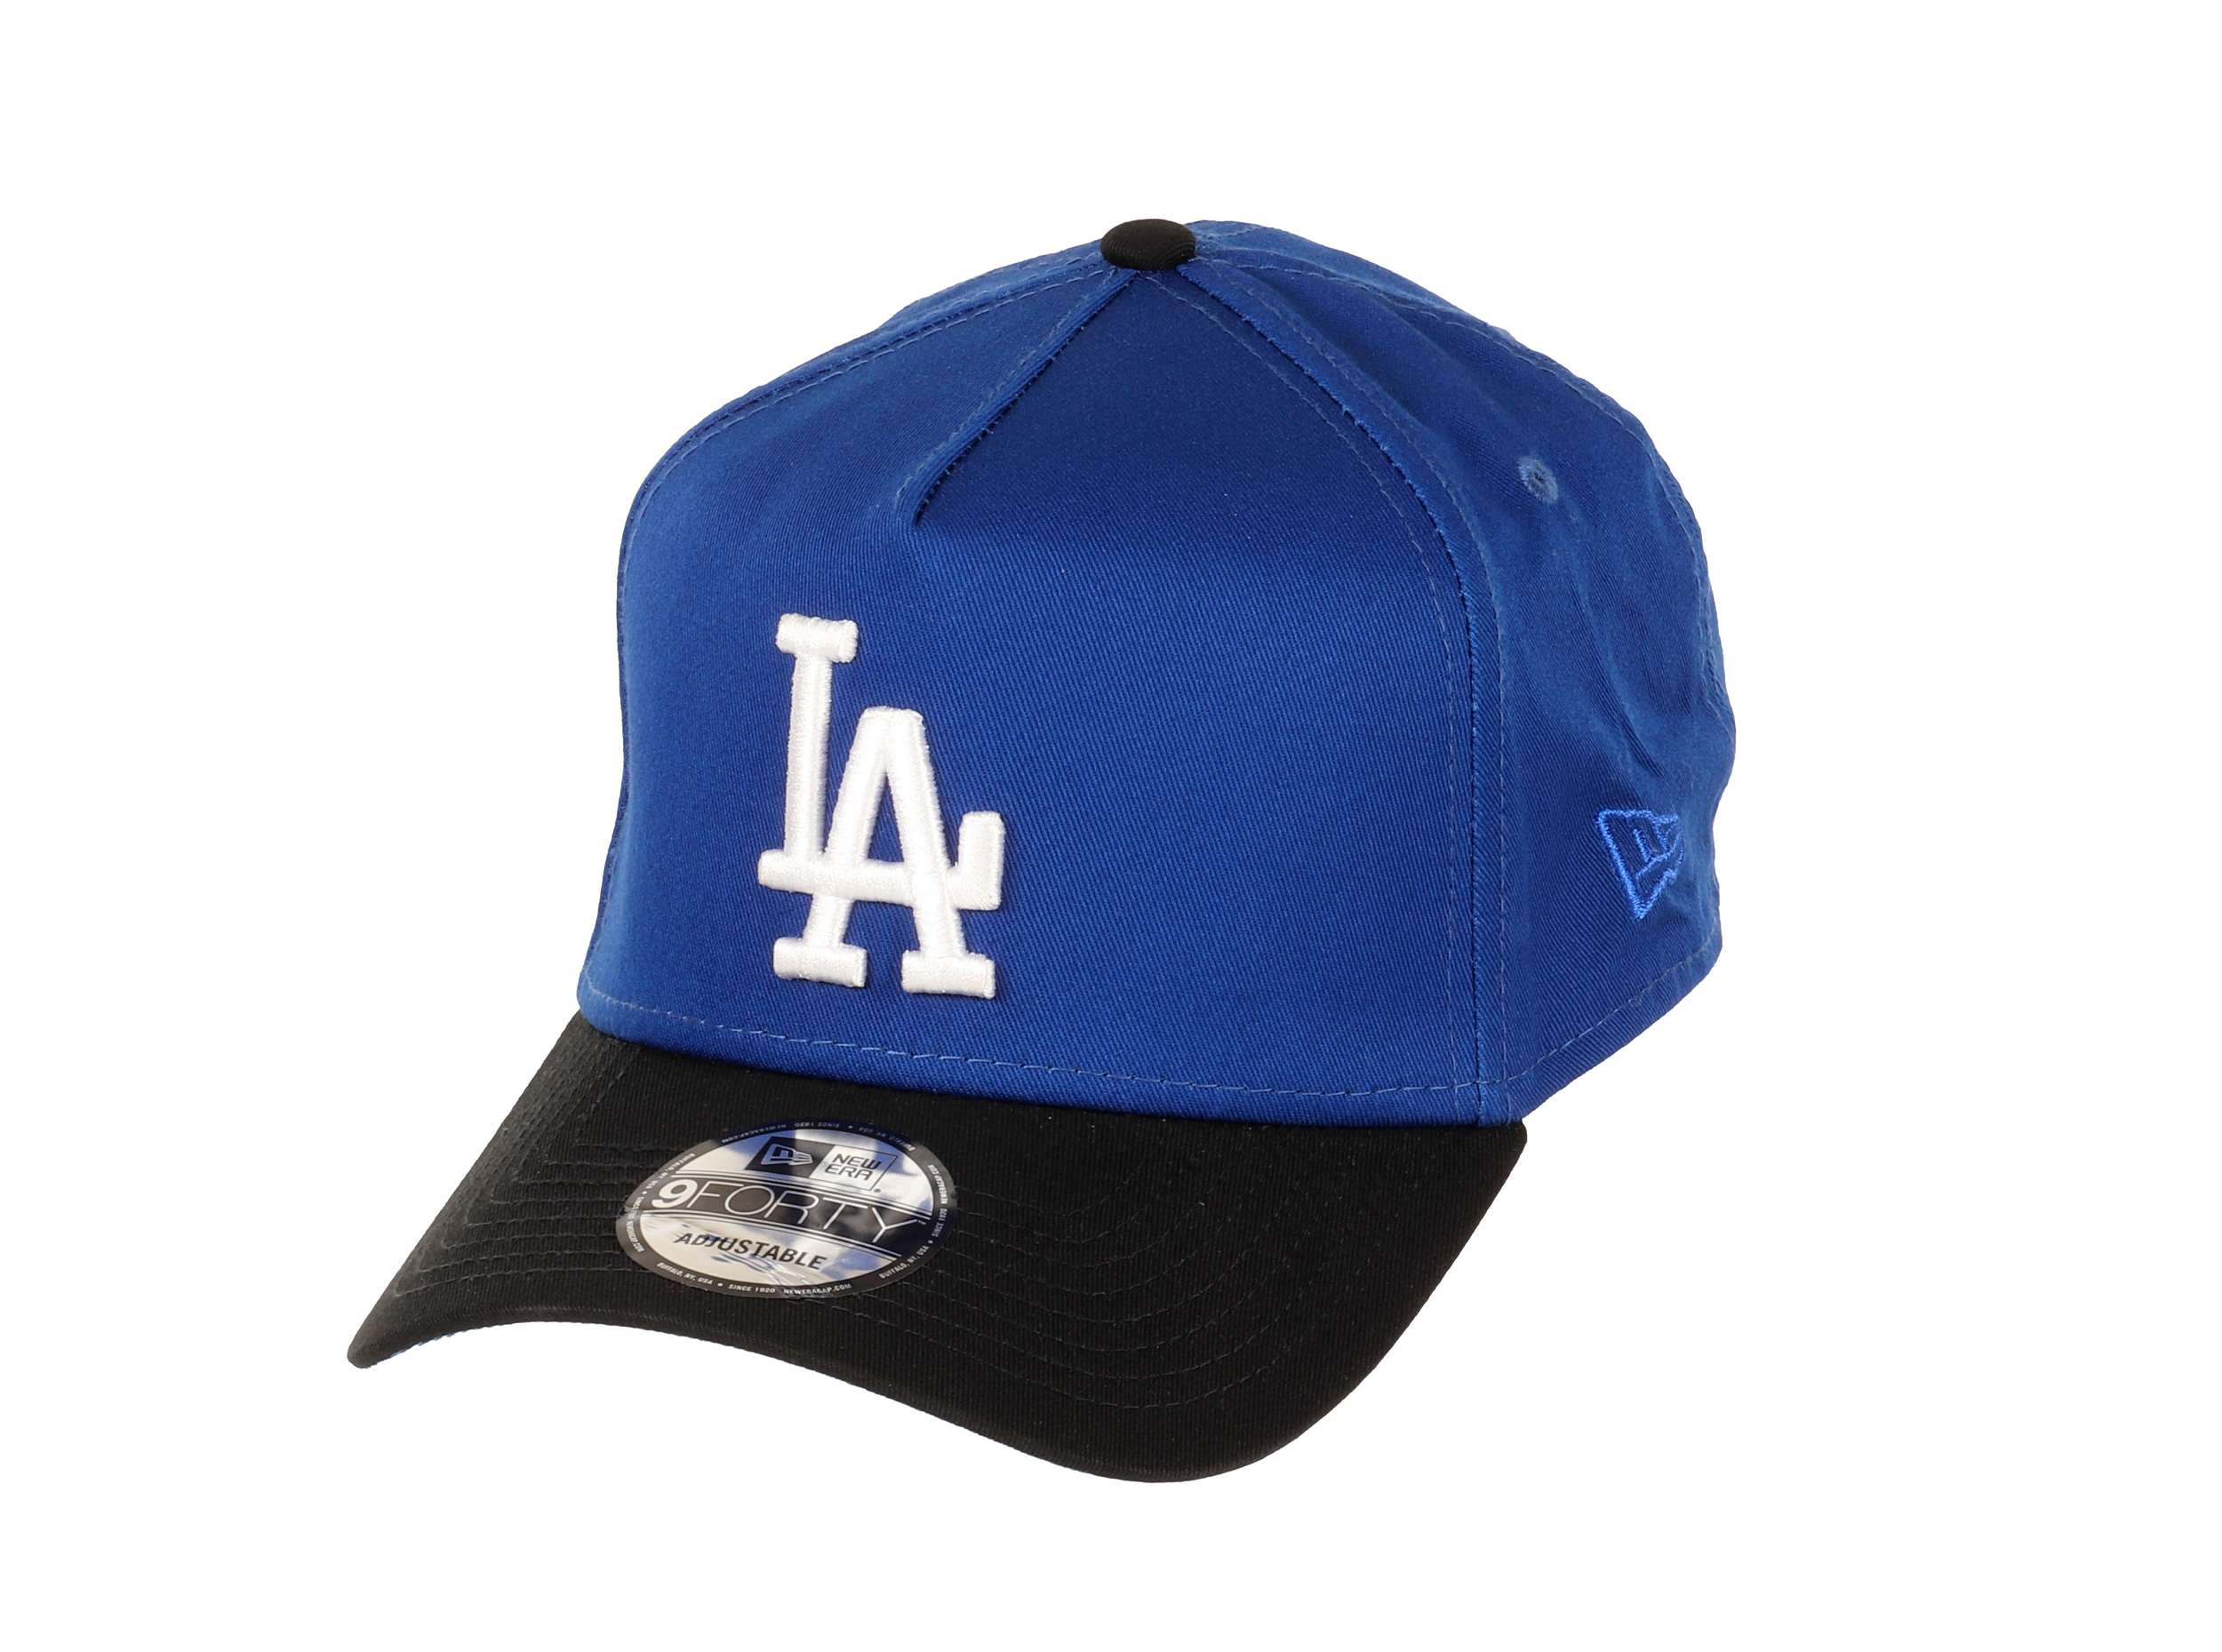 Los Angeles Dodgers MLB 50th Anniversary Dodgers Stadium Sidepatch Cooperstown Royal Blue Sky 9Forty A-Frame Snapback Cap New Era